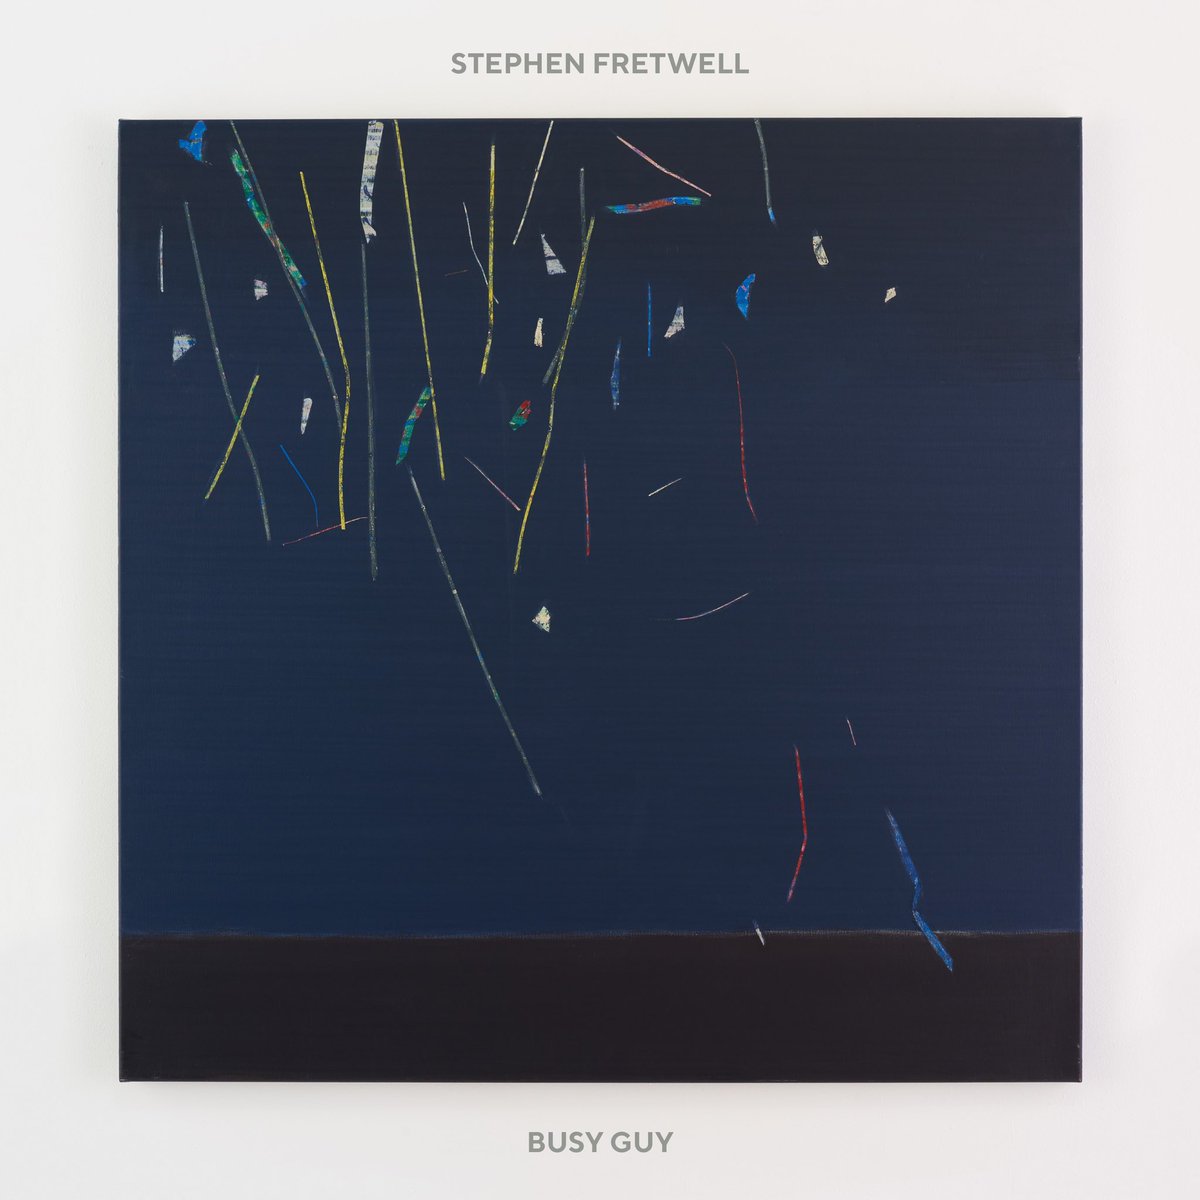 #LoveRecordStores Album spotlight @stephenfretwell’s new album Busy Guy is out now on @SpeedyWunder and is available at all good record stores